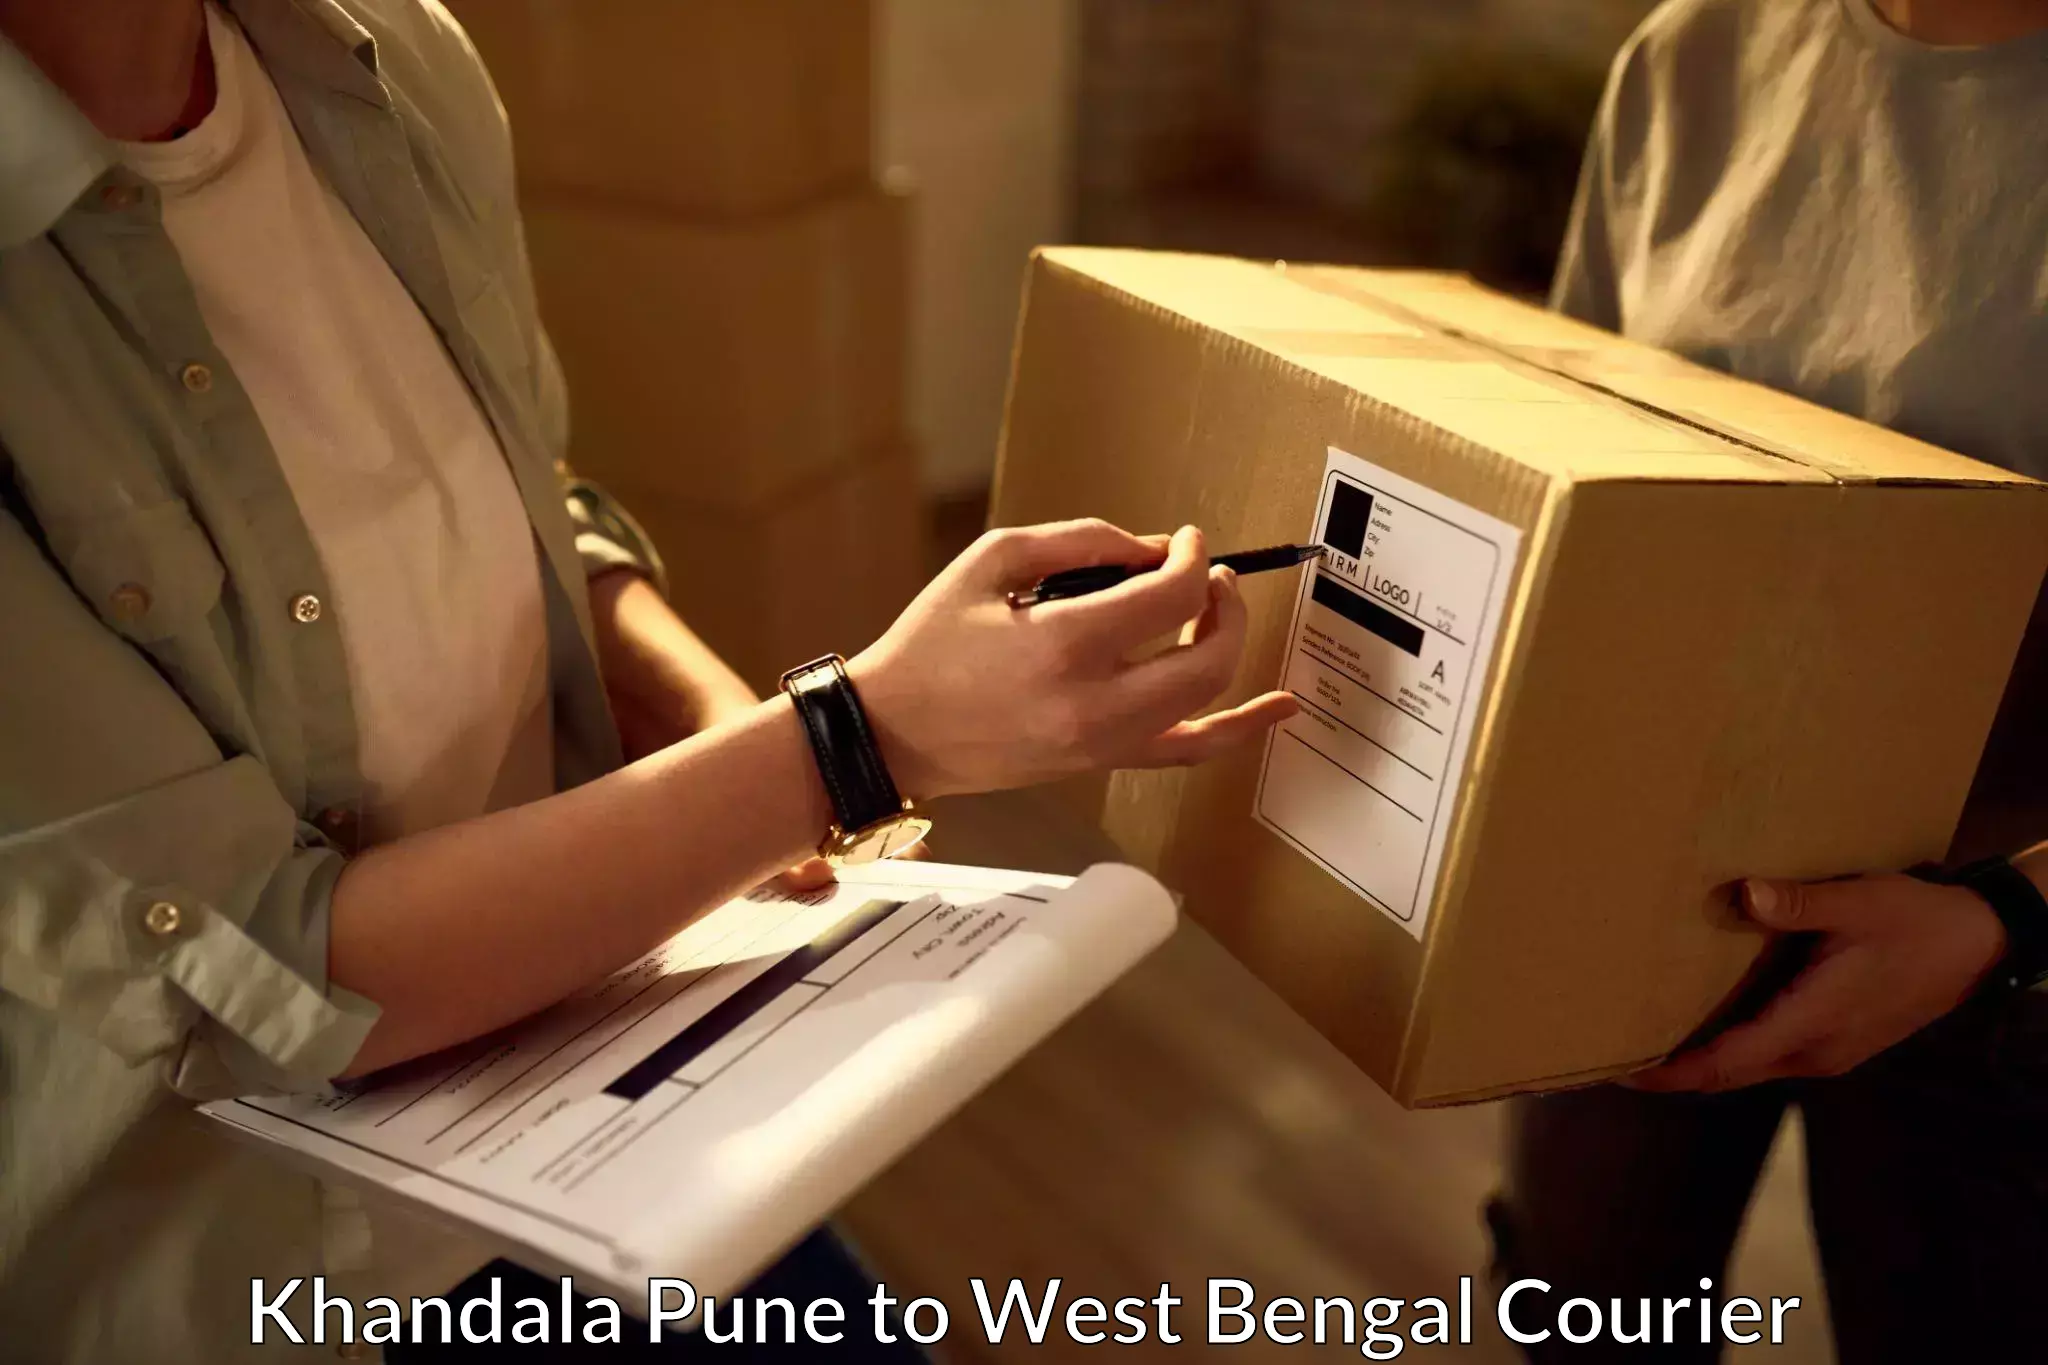 State-of-the-art courier technology Khandala Pune to Mirzapur Bardhaman